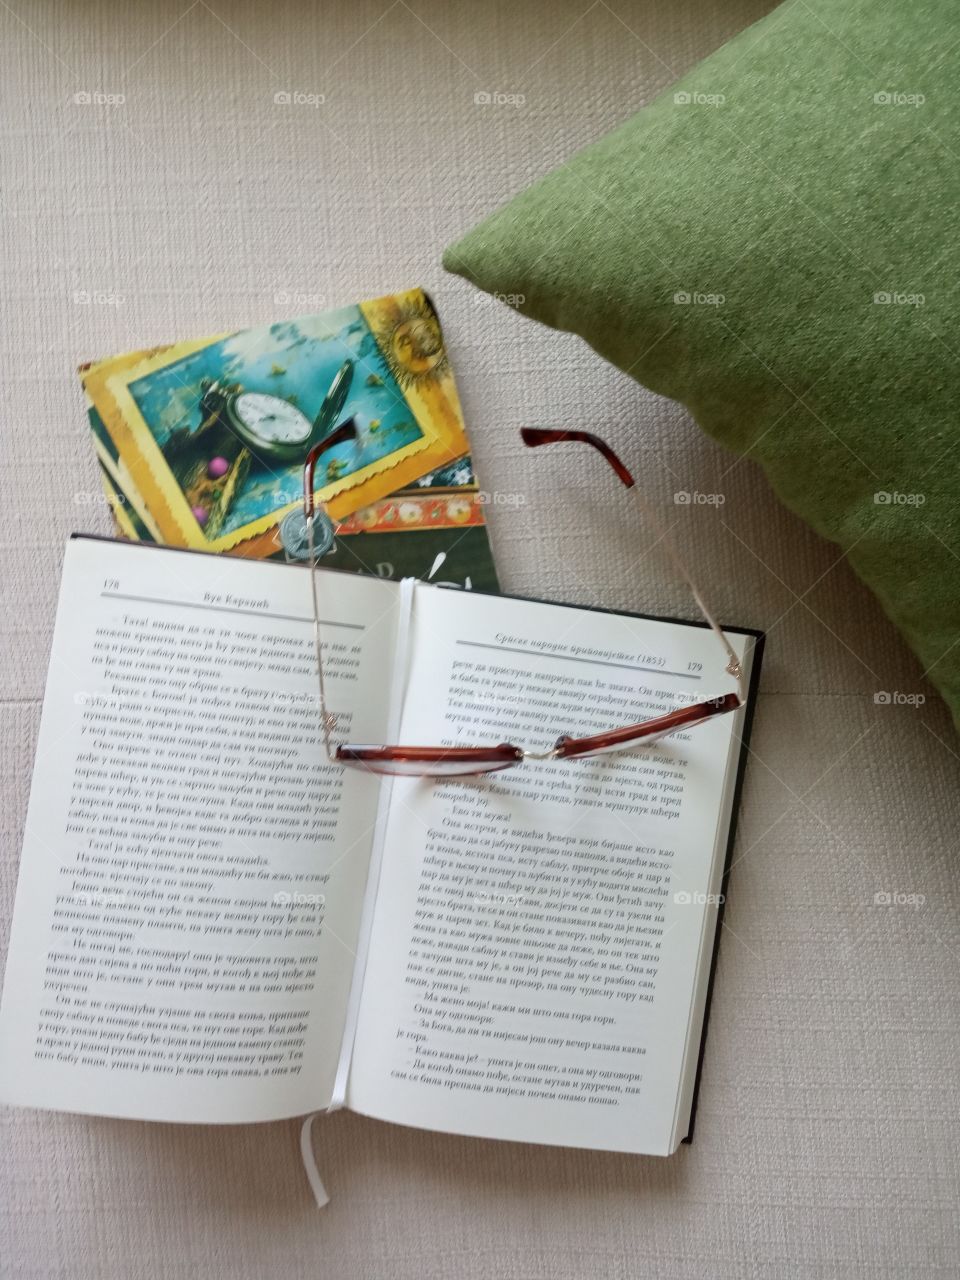 Arrangement of green pillow, books and glasses.